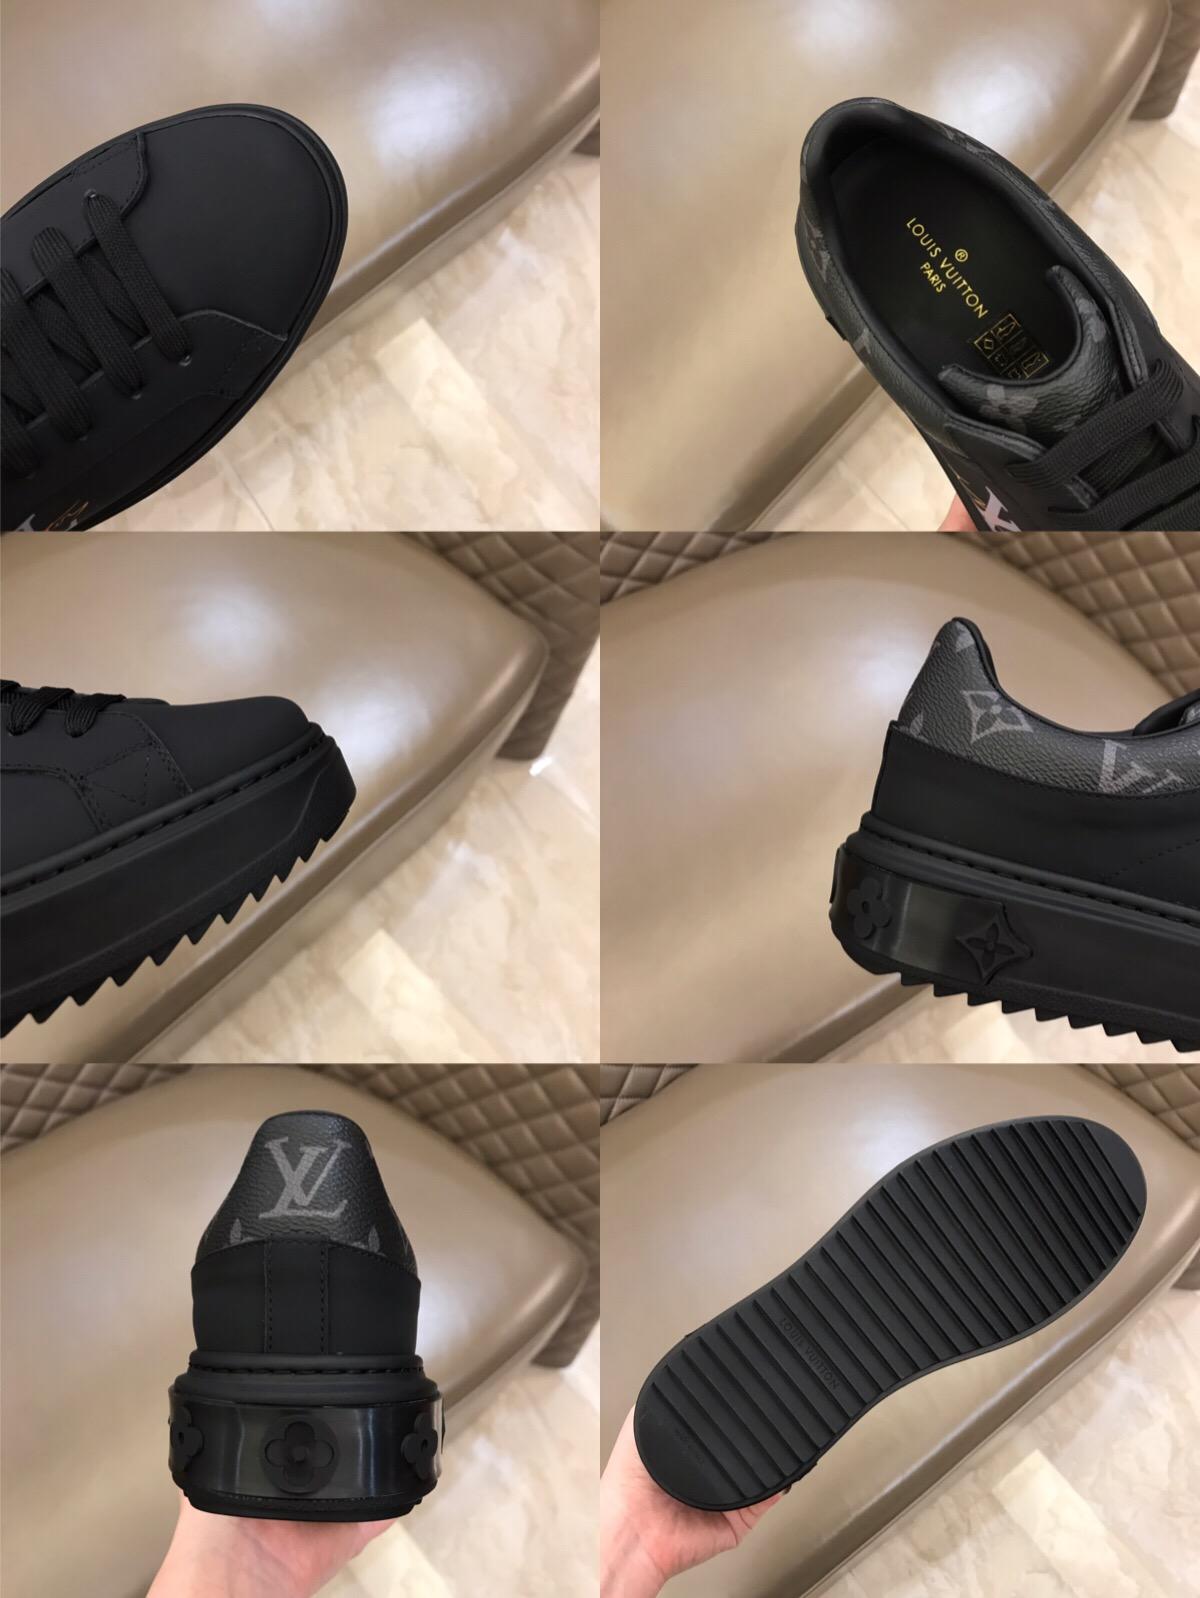 lv Fashion Sneakers Black and LV print with black sole MS02854